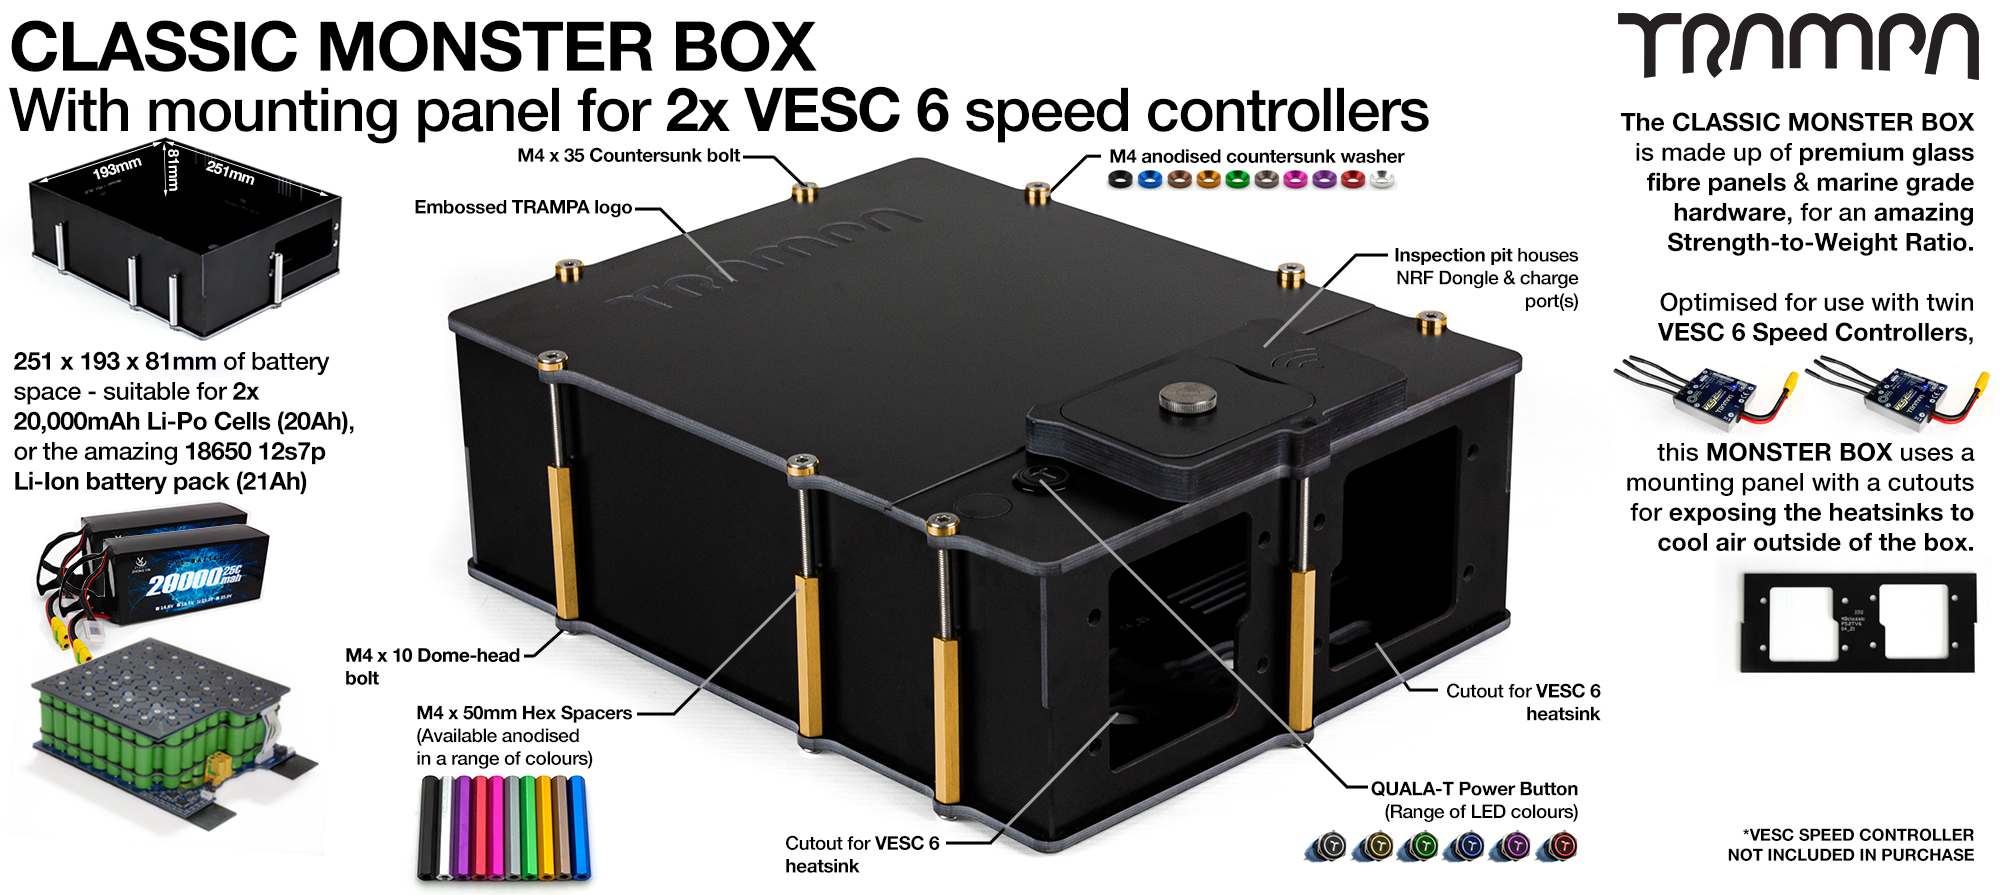 Classic MONSTER Box MkV fits 84x 18650 cells or 2x22000 mAh Lipos & has Panels to fit 2x VESC 6 Internally. Works in conjunction with TRAMPA's 2WD Electric Decks